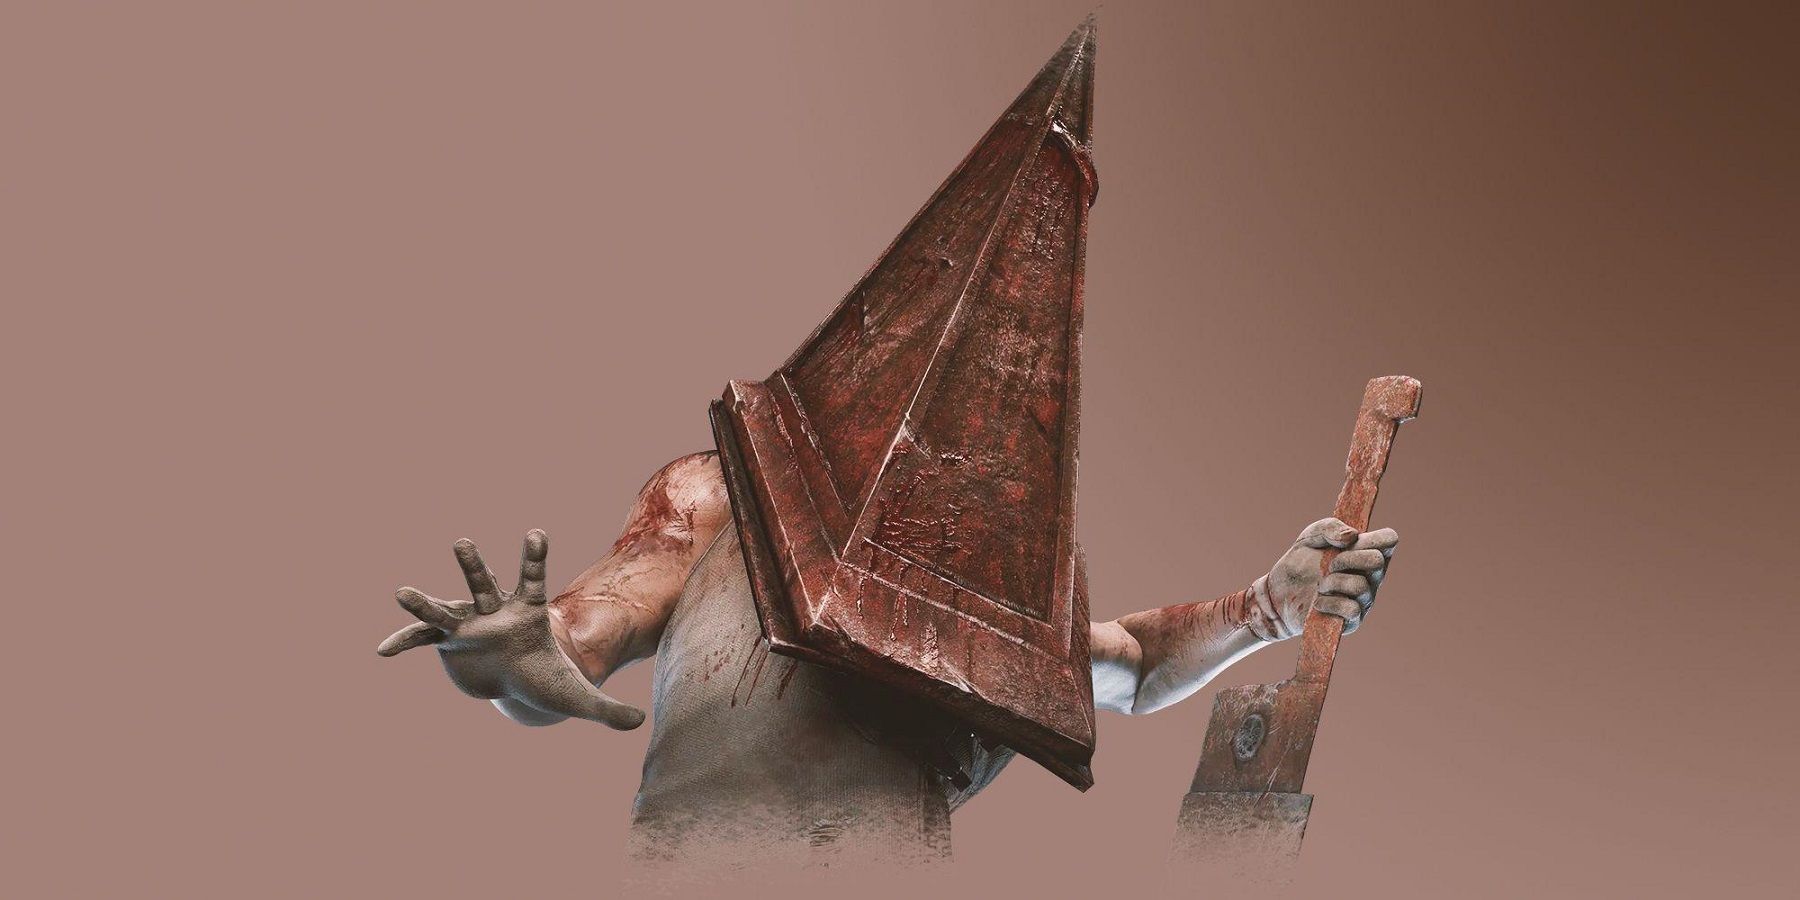 Why Pyramid Head's Designer Wants The Alternate Version To Be Used More